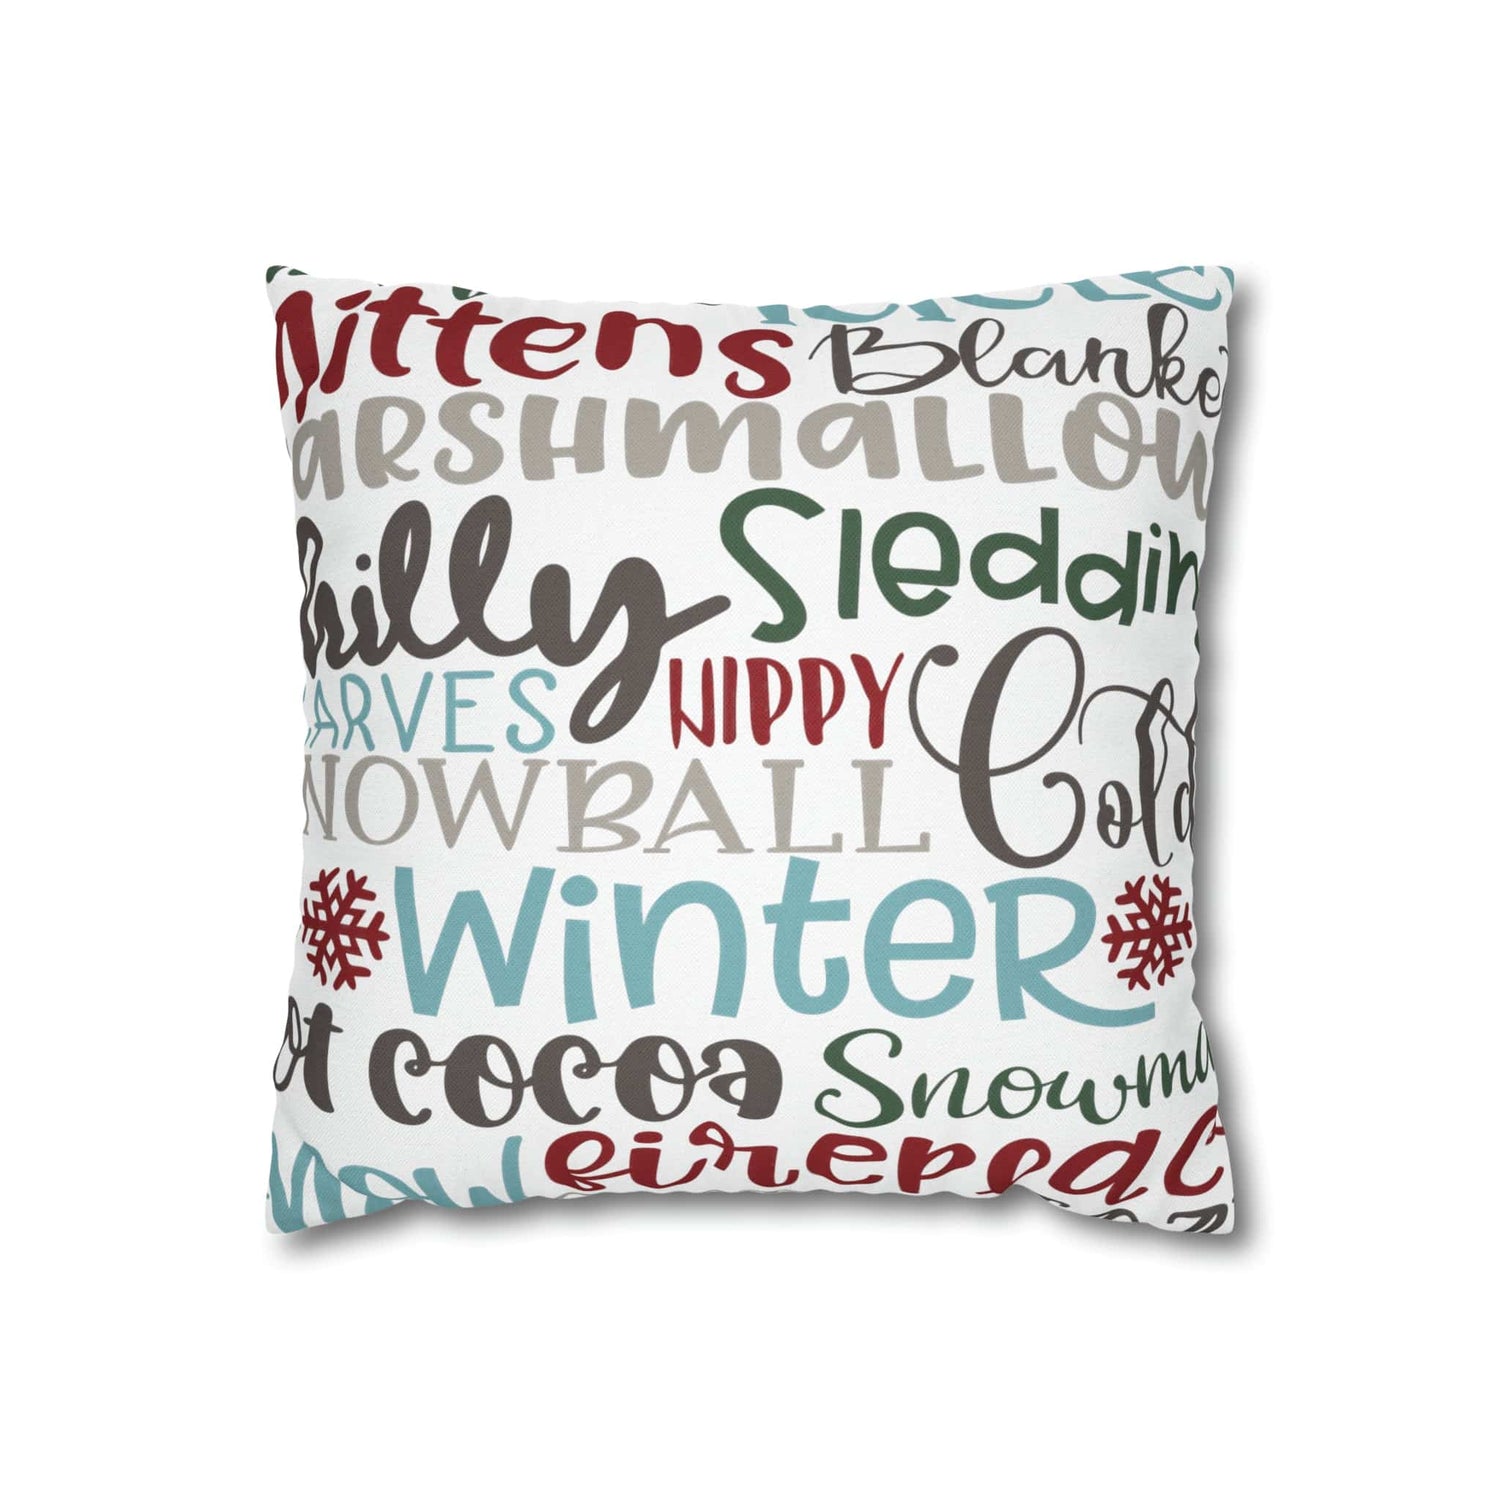 Kate McEnroe New York Christmas Throw Pillow Cover, Mittens, Mashmallows, Snowballs, Sledding, Chilly Winter Word Art Cushion Covers, Farmhouse DecorThrow Pillow Covers13449205045809851454